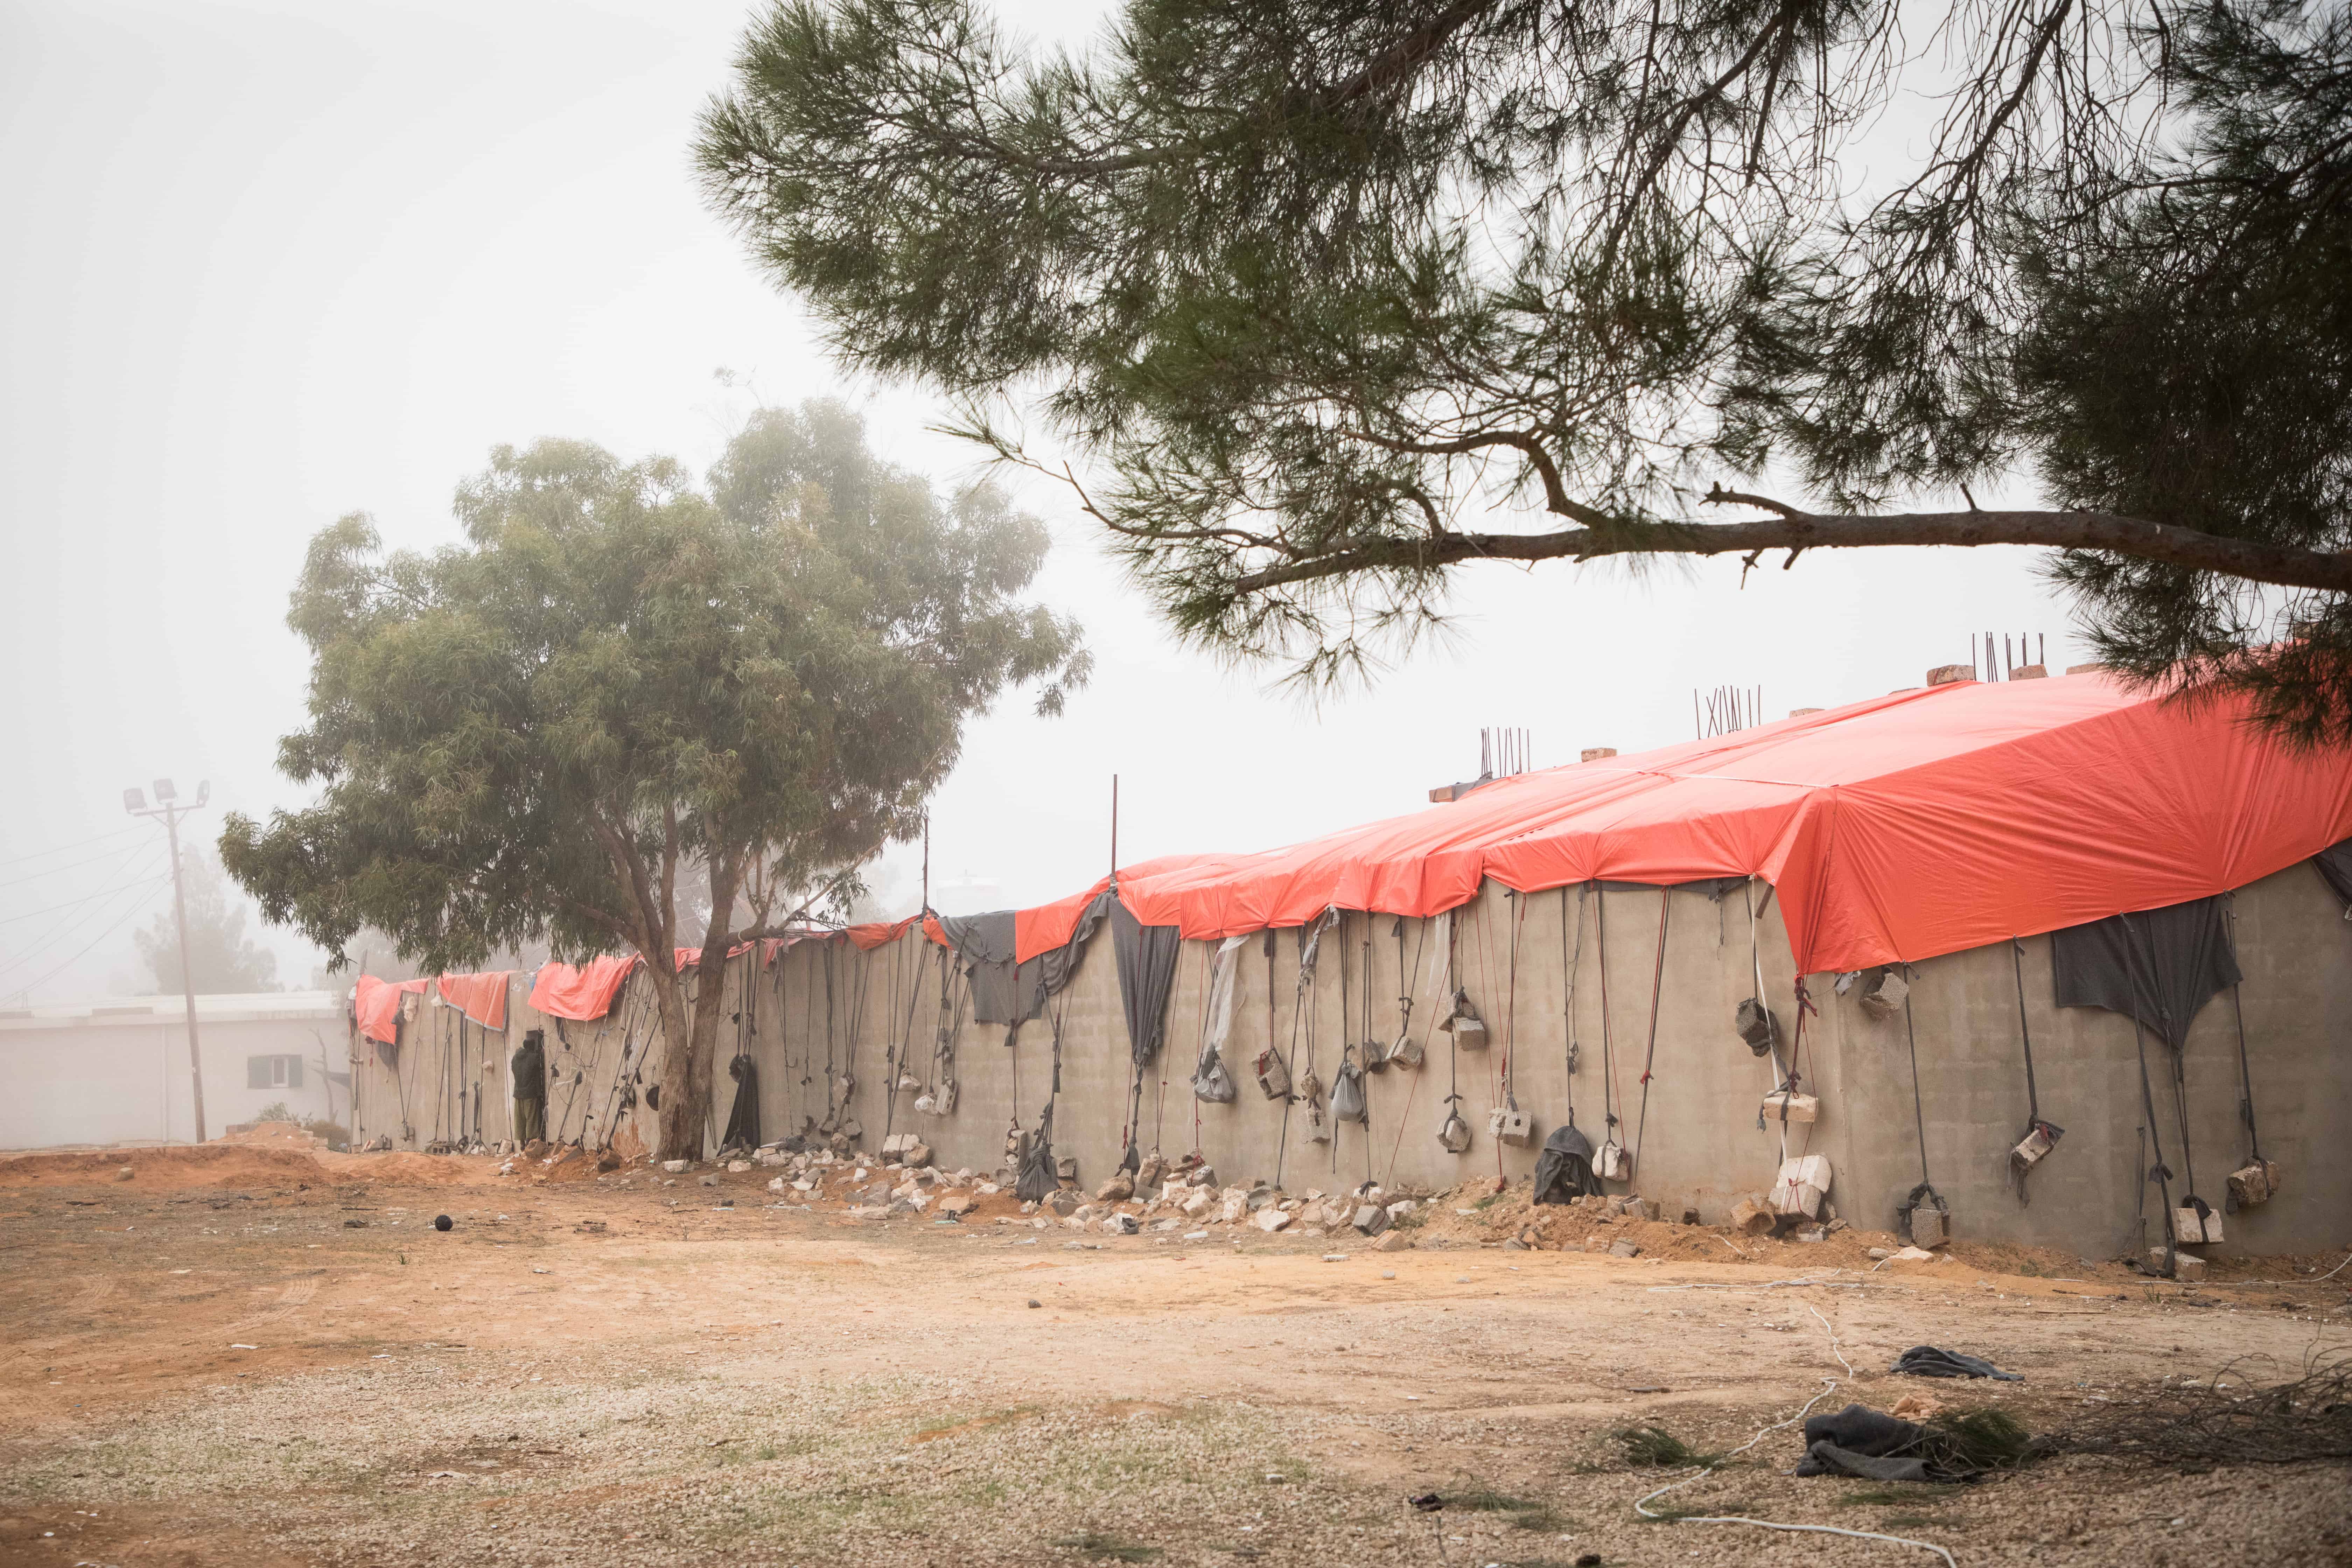 Tents that form part of the Dahr-el-Jebel detention centre, located in a mountainous region south of Tripoli. When MSF began working there in May 2019, we were horrified to discover that at least 22 migrants and refugees had died of diseases, mainly tuberculosis. IOM and UNHCR were supposed to provide assistance, including medical care and protection services. Libya, October 2019. © AURELIE BAUMEL/MSF